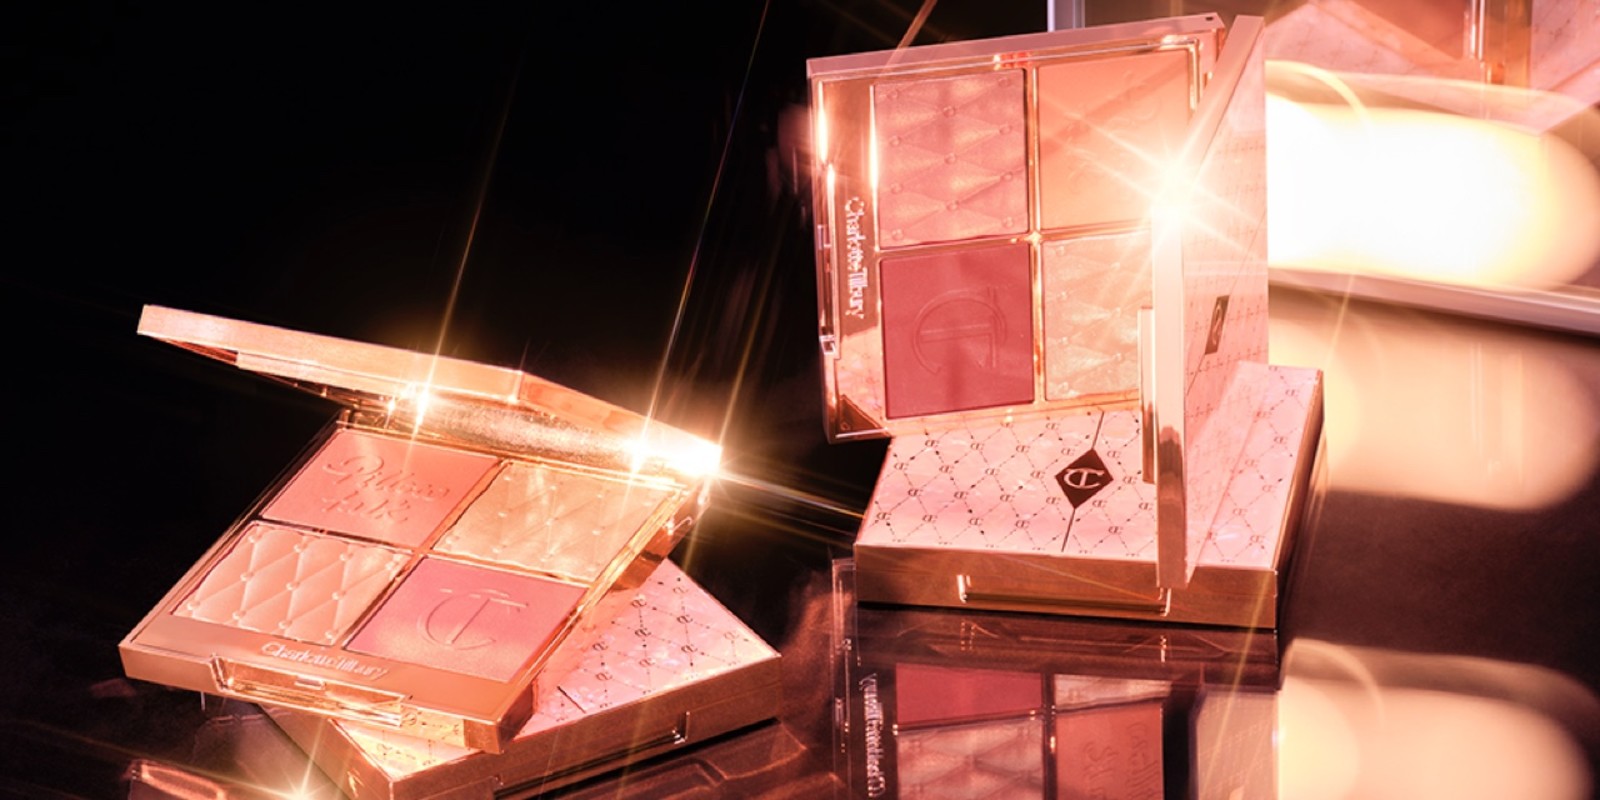 An open, face palette with matte and shimmery eyeshadows, blushes and highlighters in shades of pink and gold with a mirrored lid and a vivid pink eyeliner in gold packaging.